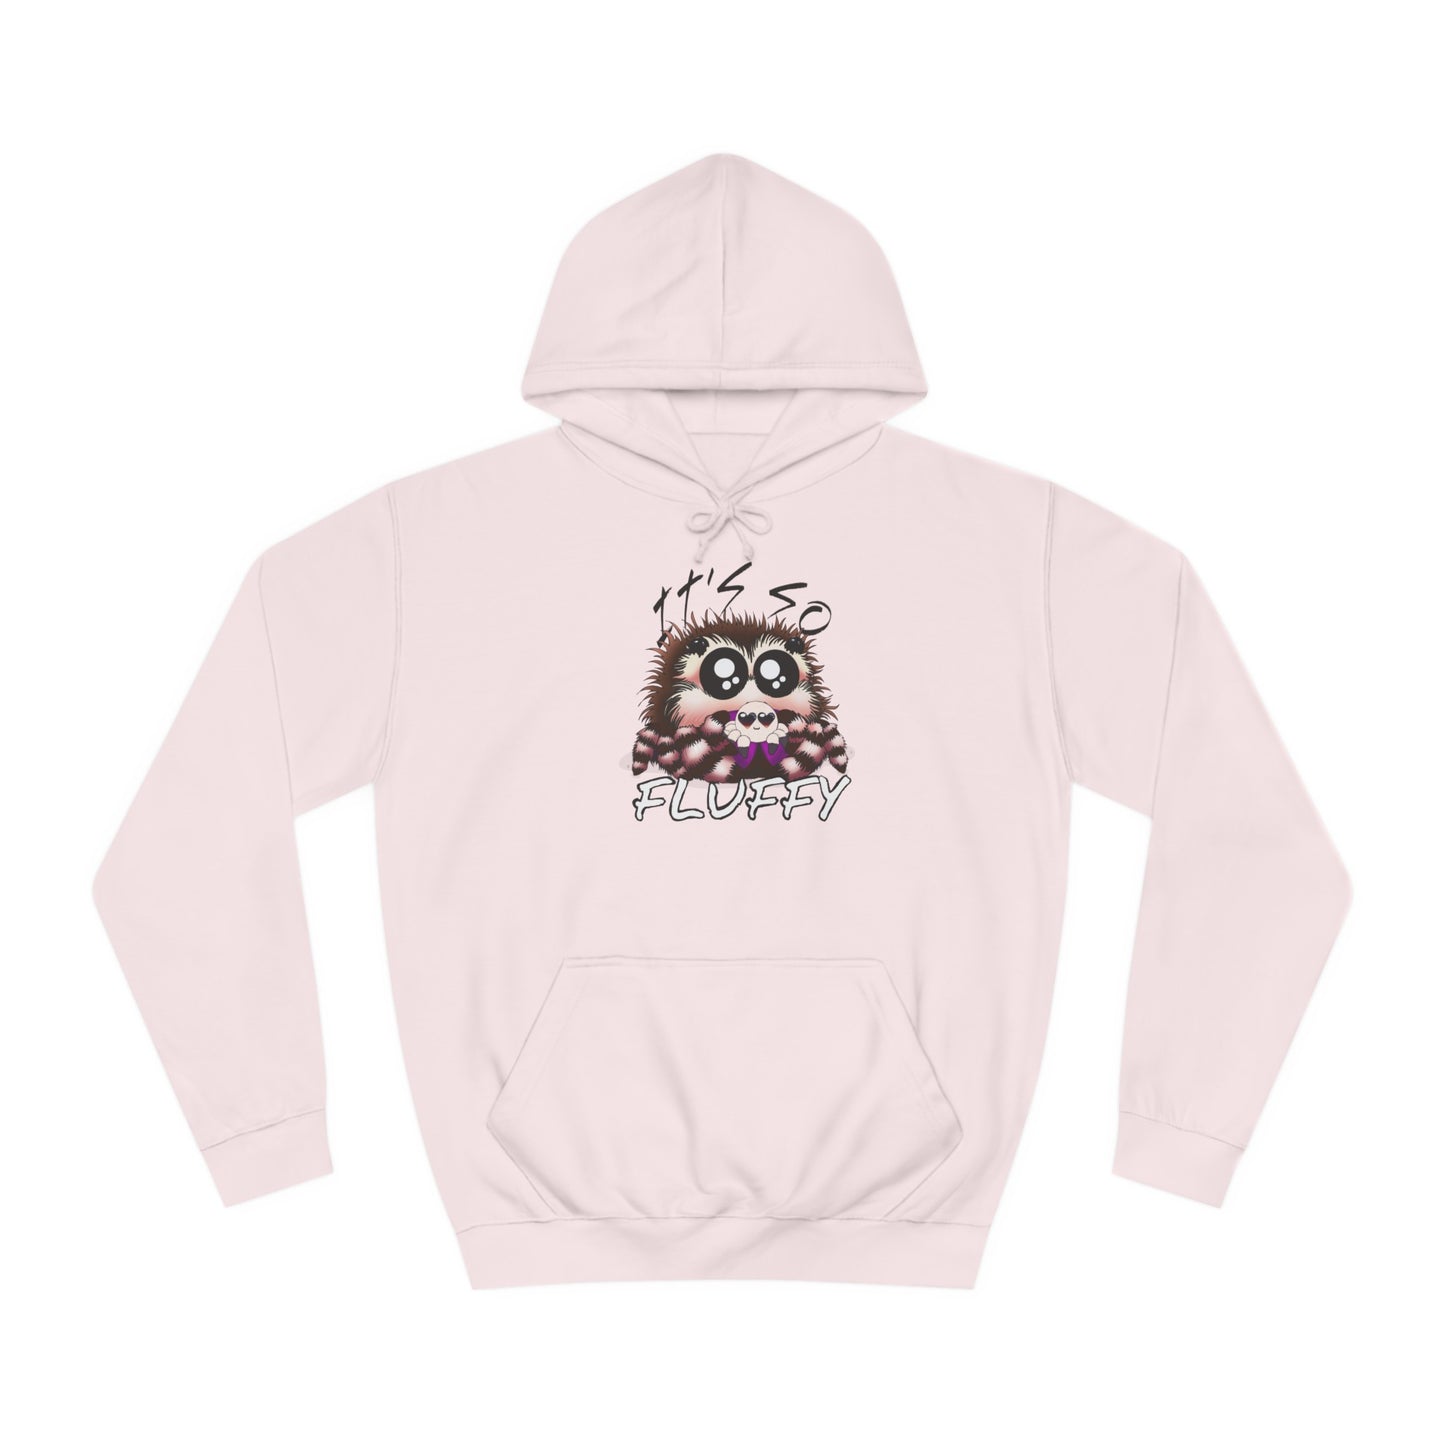 It’s So Fluffy! Kawaii Jumping Spider Hoodie